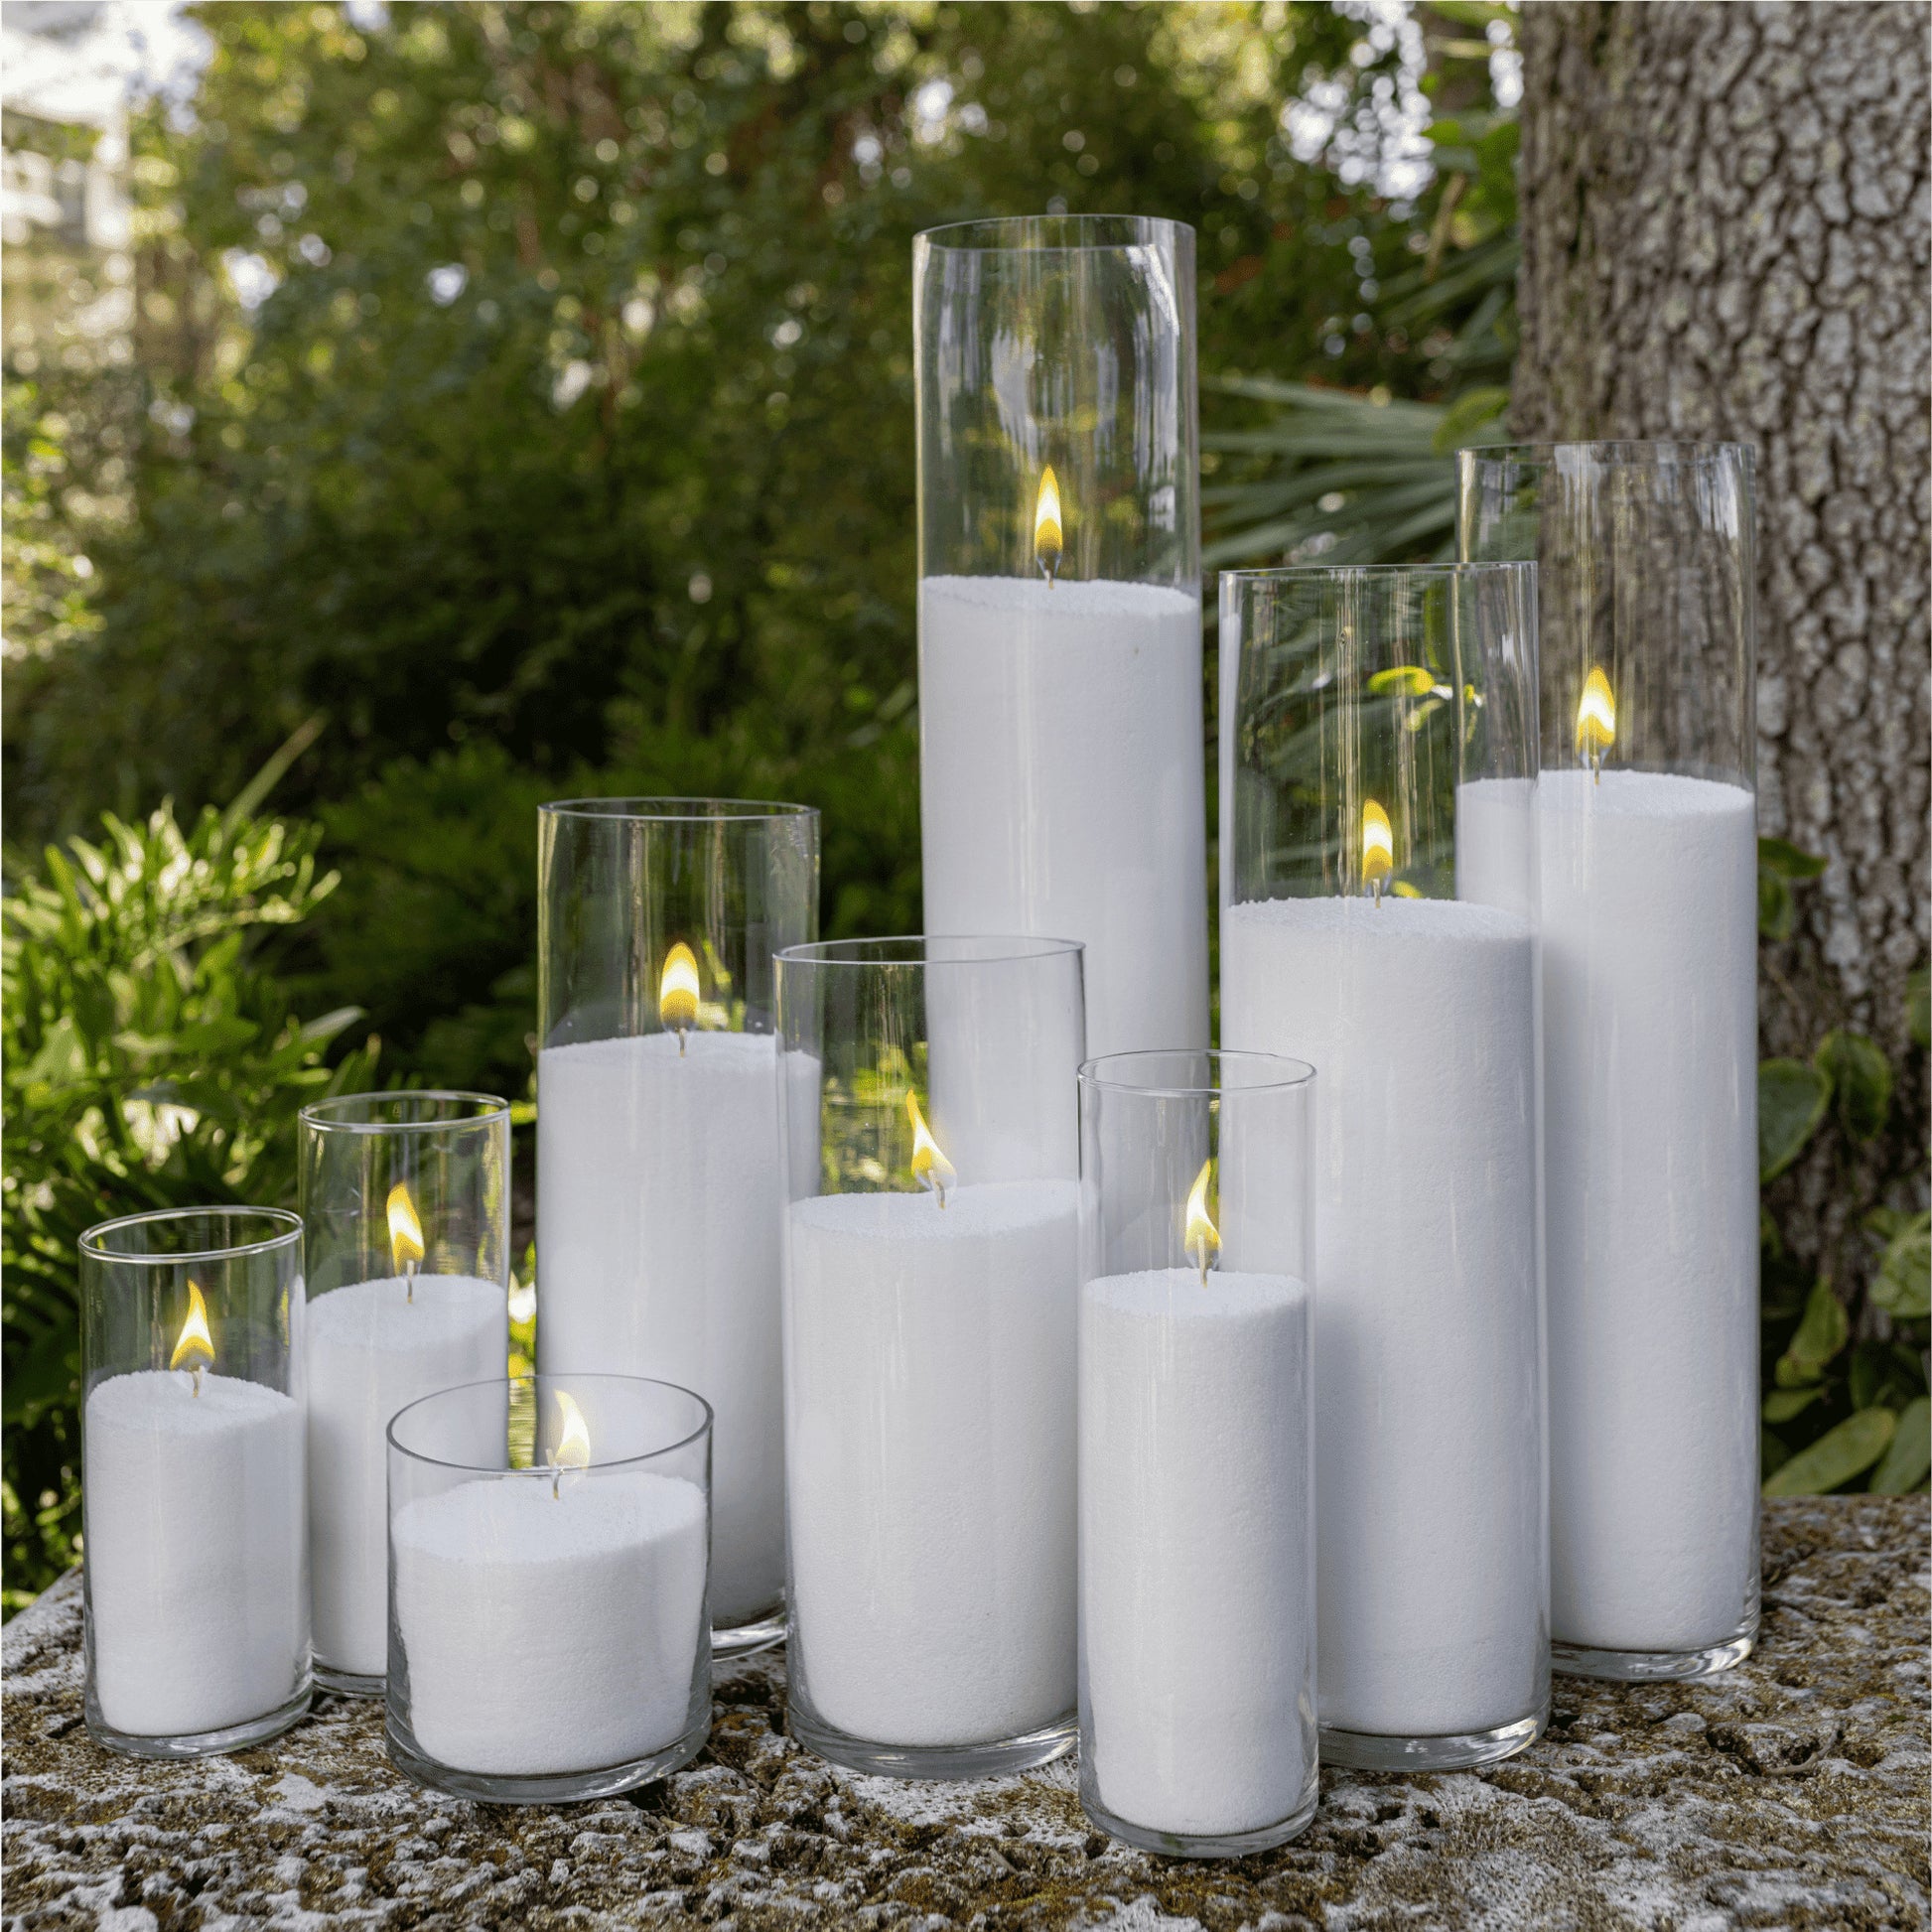 What's your favorite way to reuse pearled candles? Do you like to refr